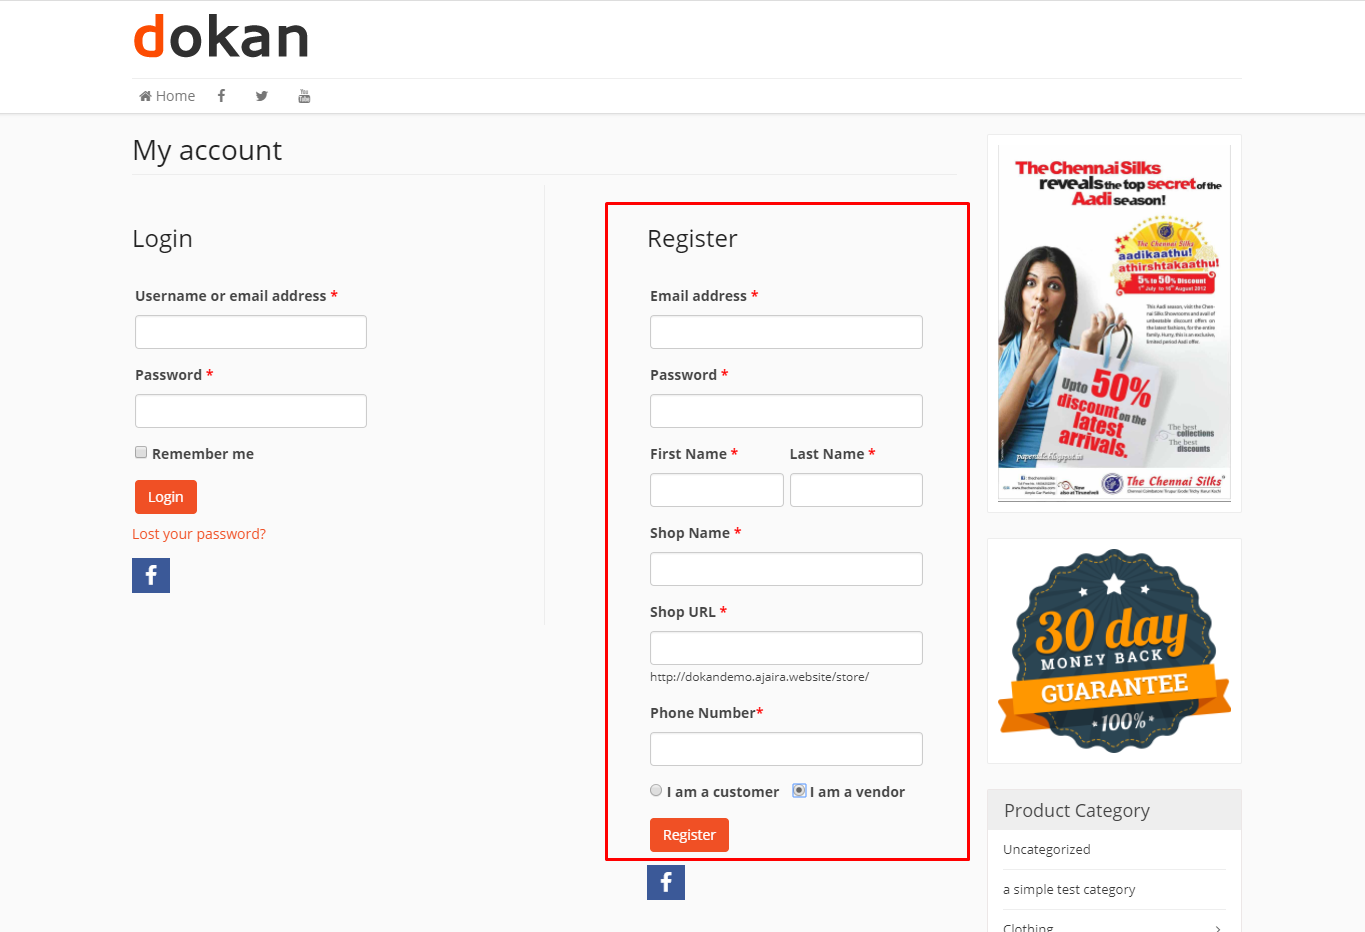 This is a screenshot of the dokan registration for vendors